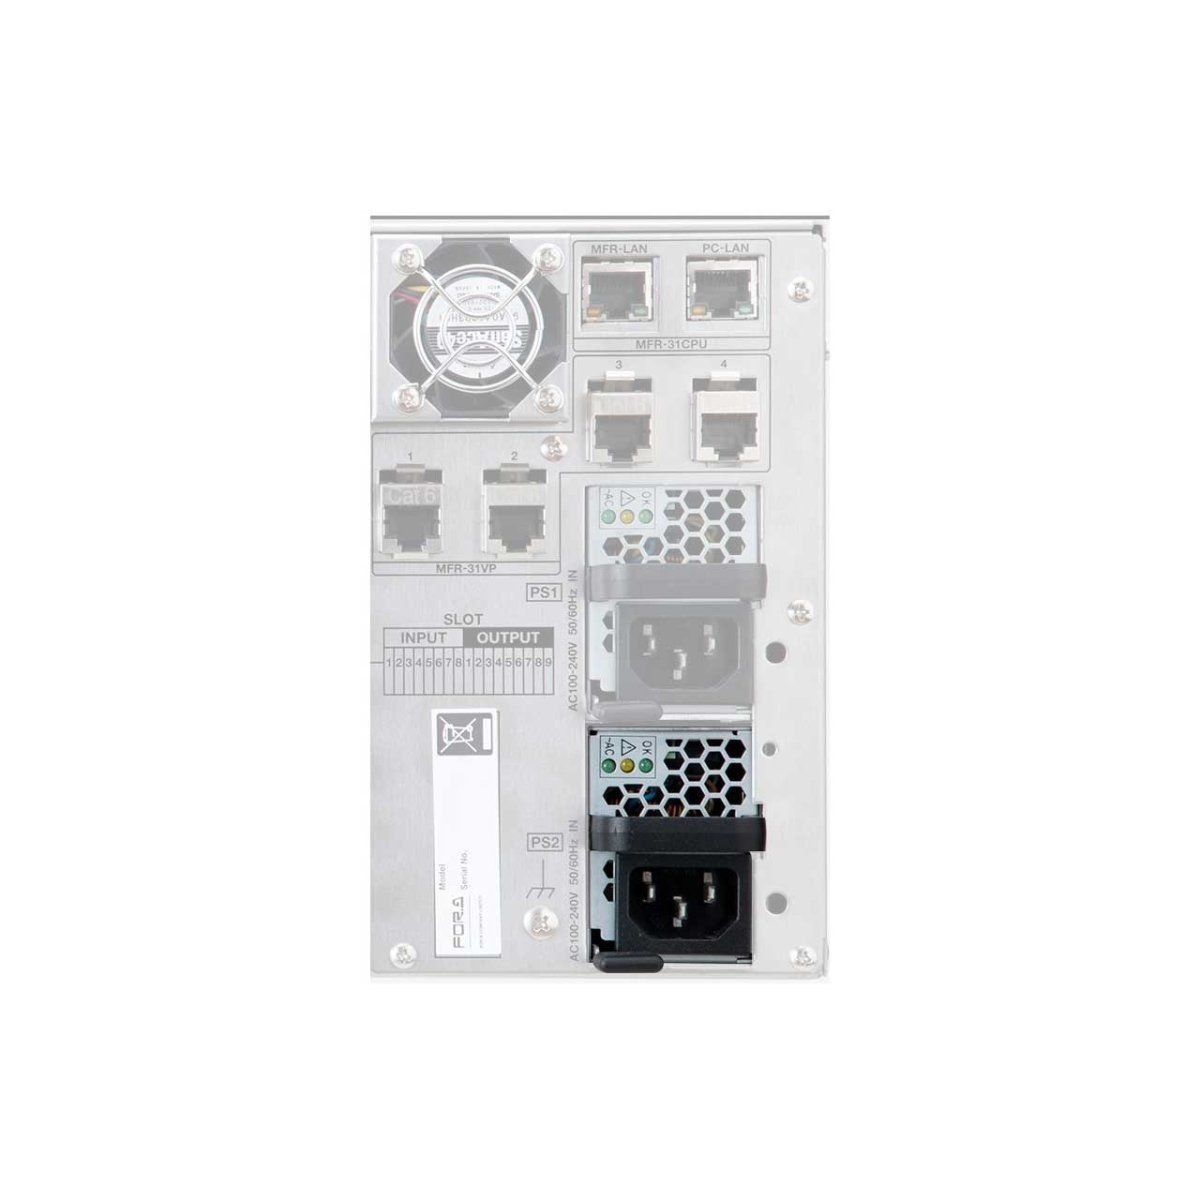 Picture of FOR-A FORA-MFR-31PS Redundant Power Supply for MFR-3100EX